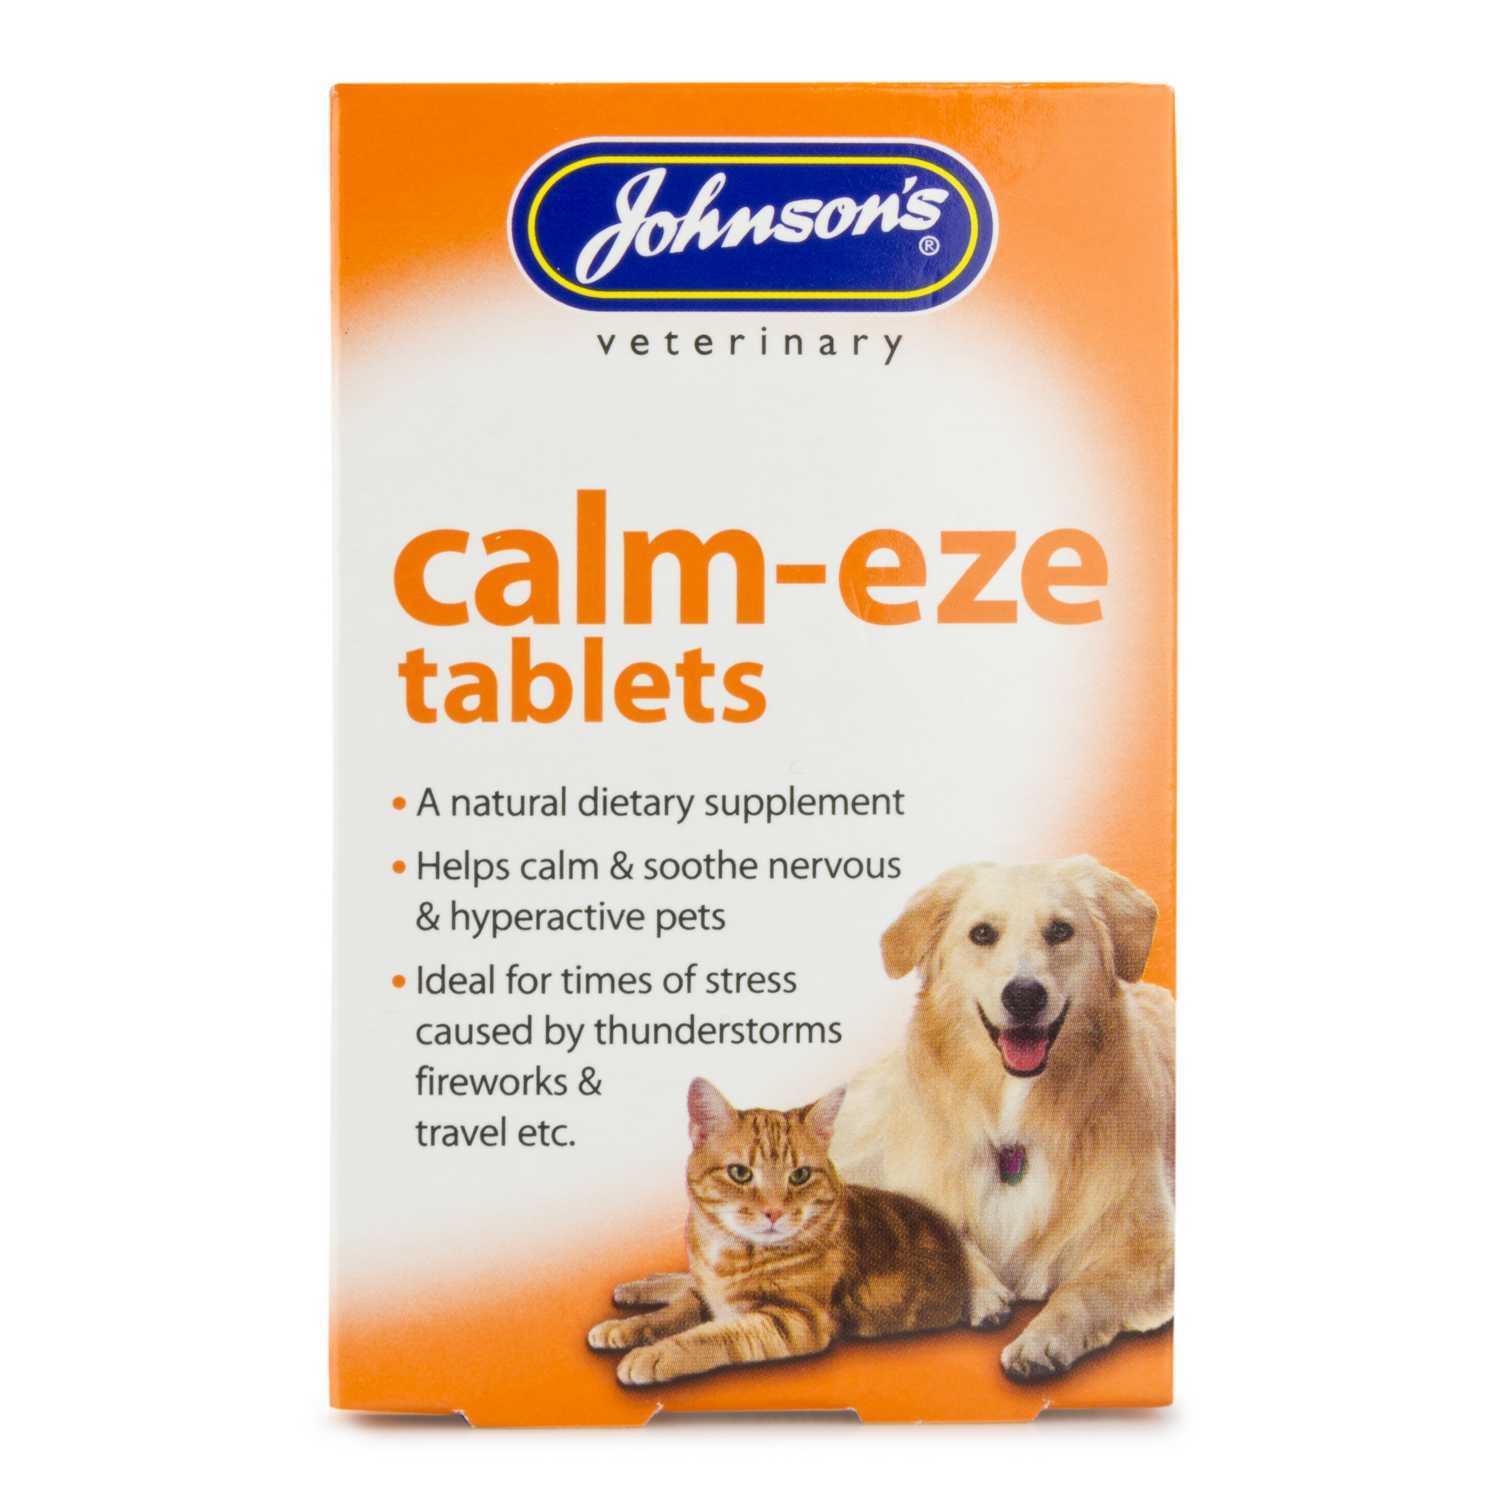 Johnson's Calm-eze Tablets for Dogs and Cats Image